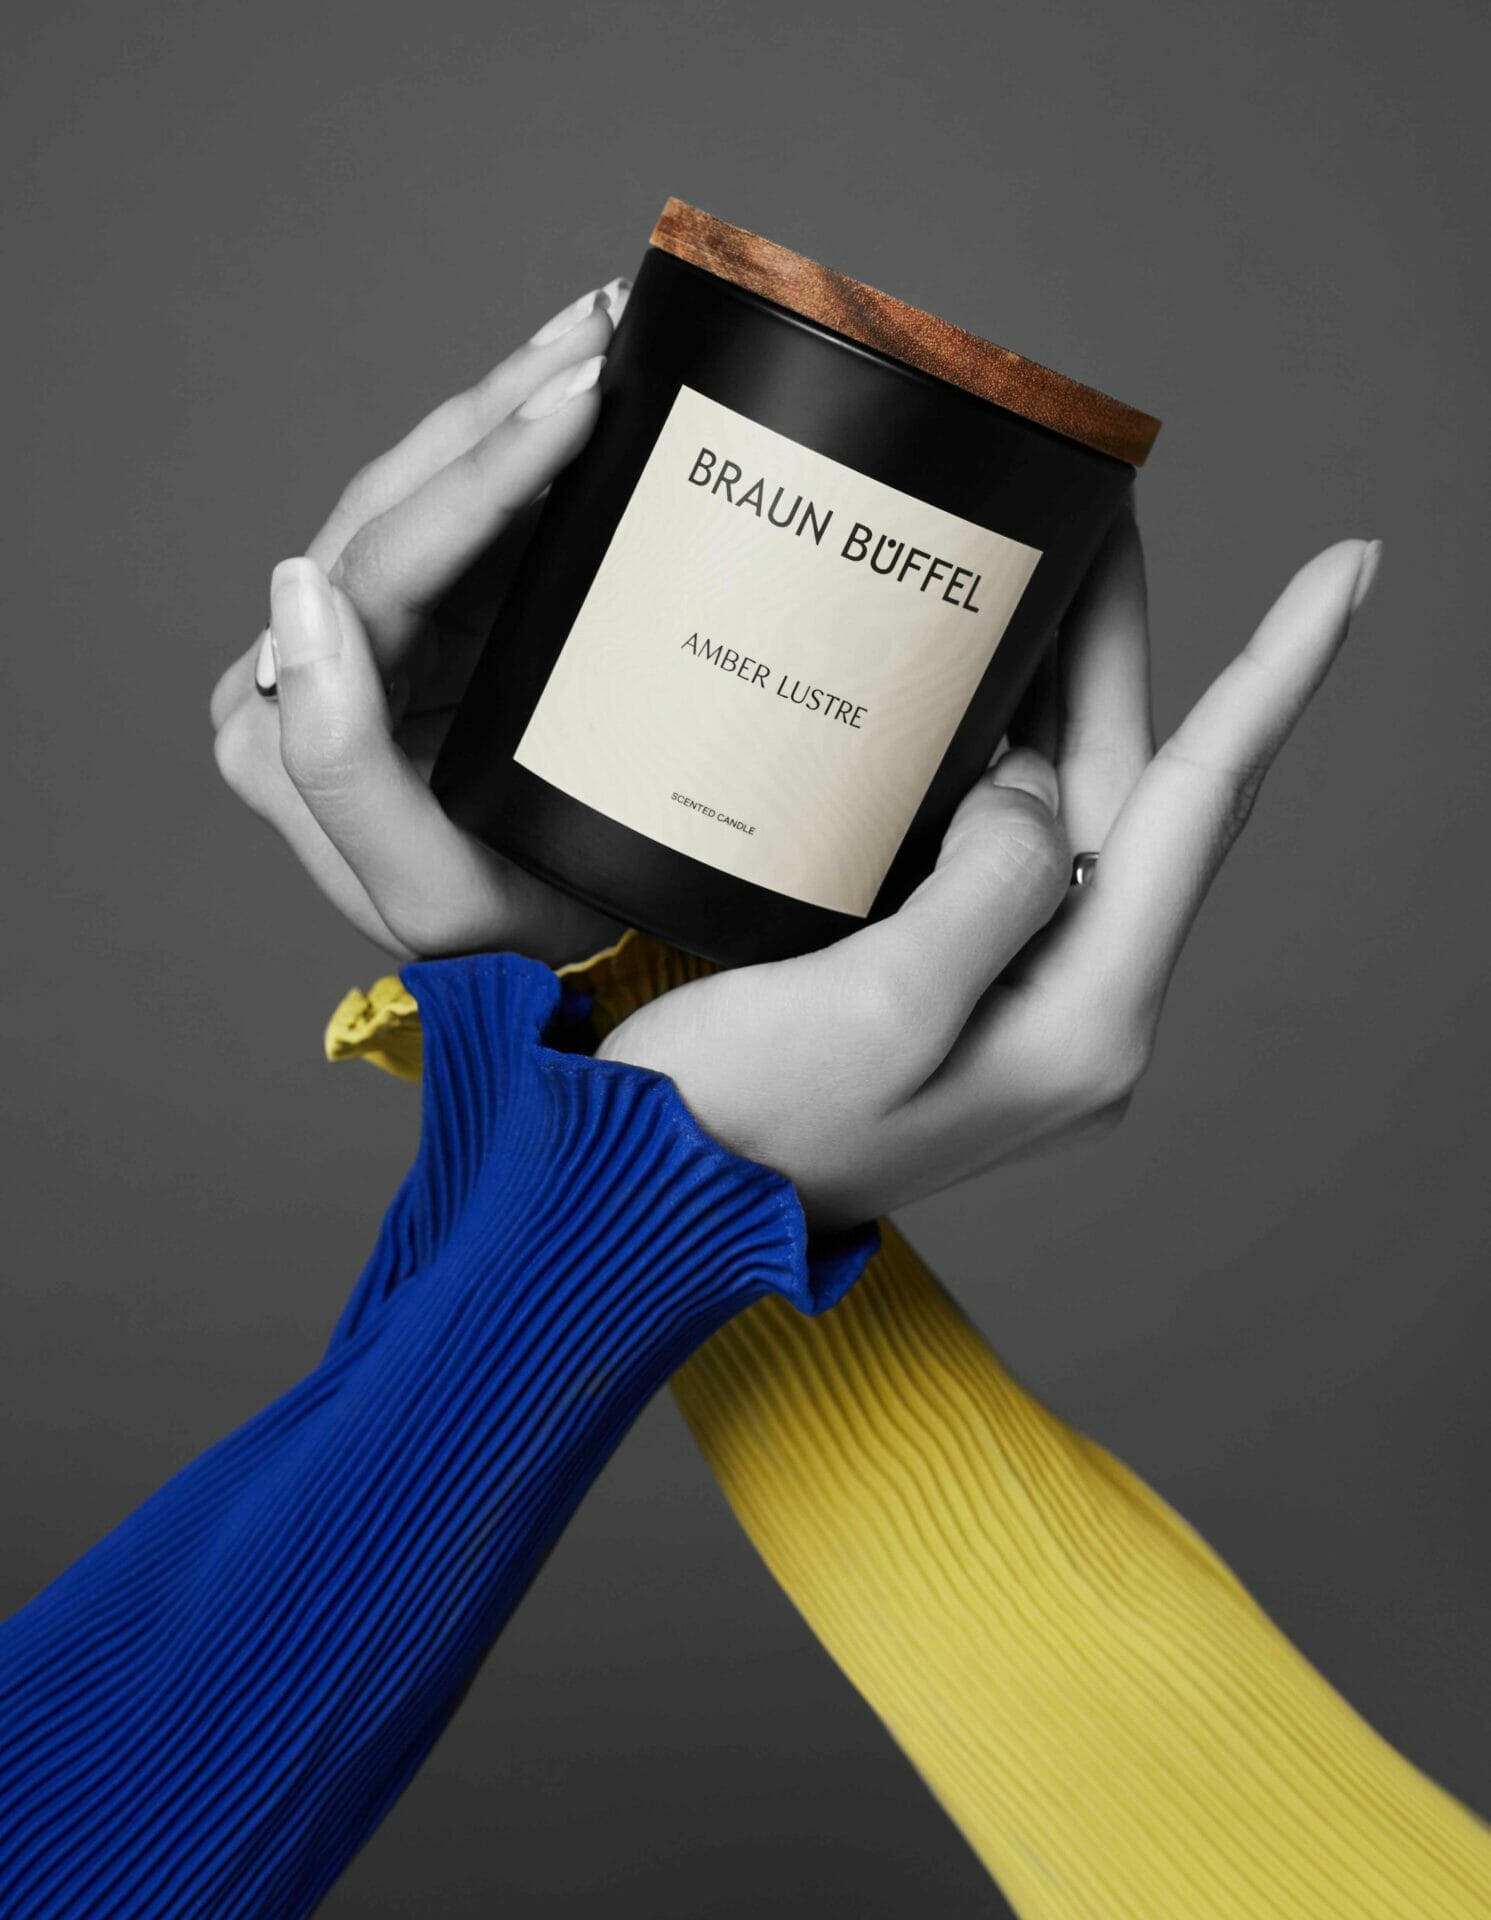 Start from 14 April 2023, receive a Braun Büffel limited-edition candle worth RM150 with RM1,000 net purchase from boutiques or online, while stocks last.